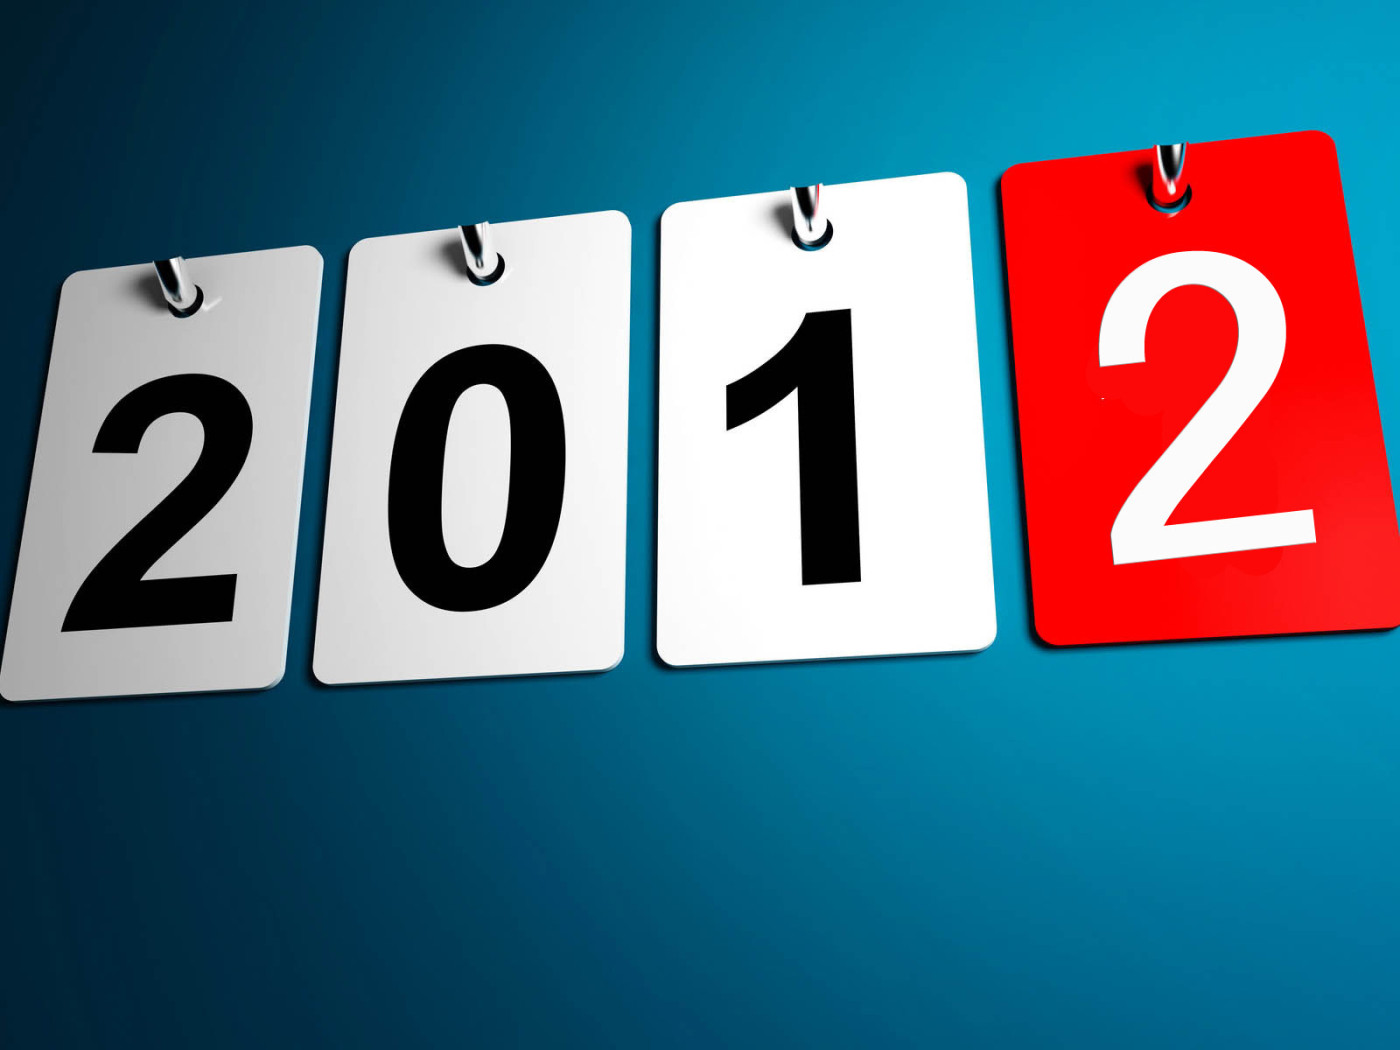 New Year 2012 High Quality Images and Wallpapers-14 1